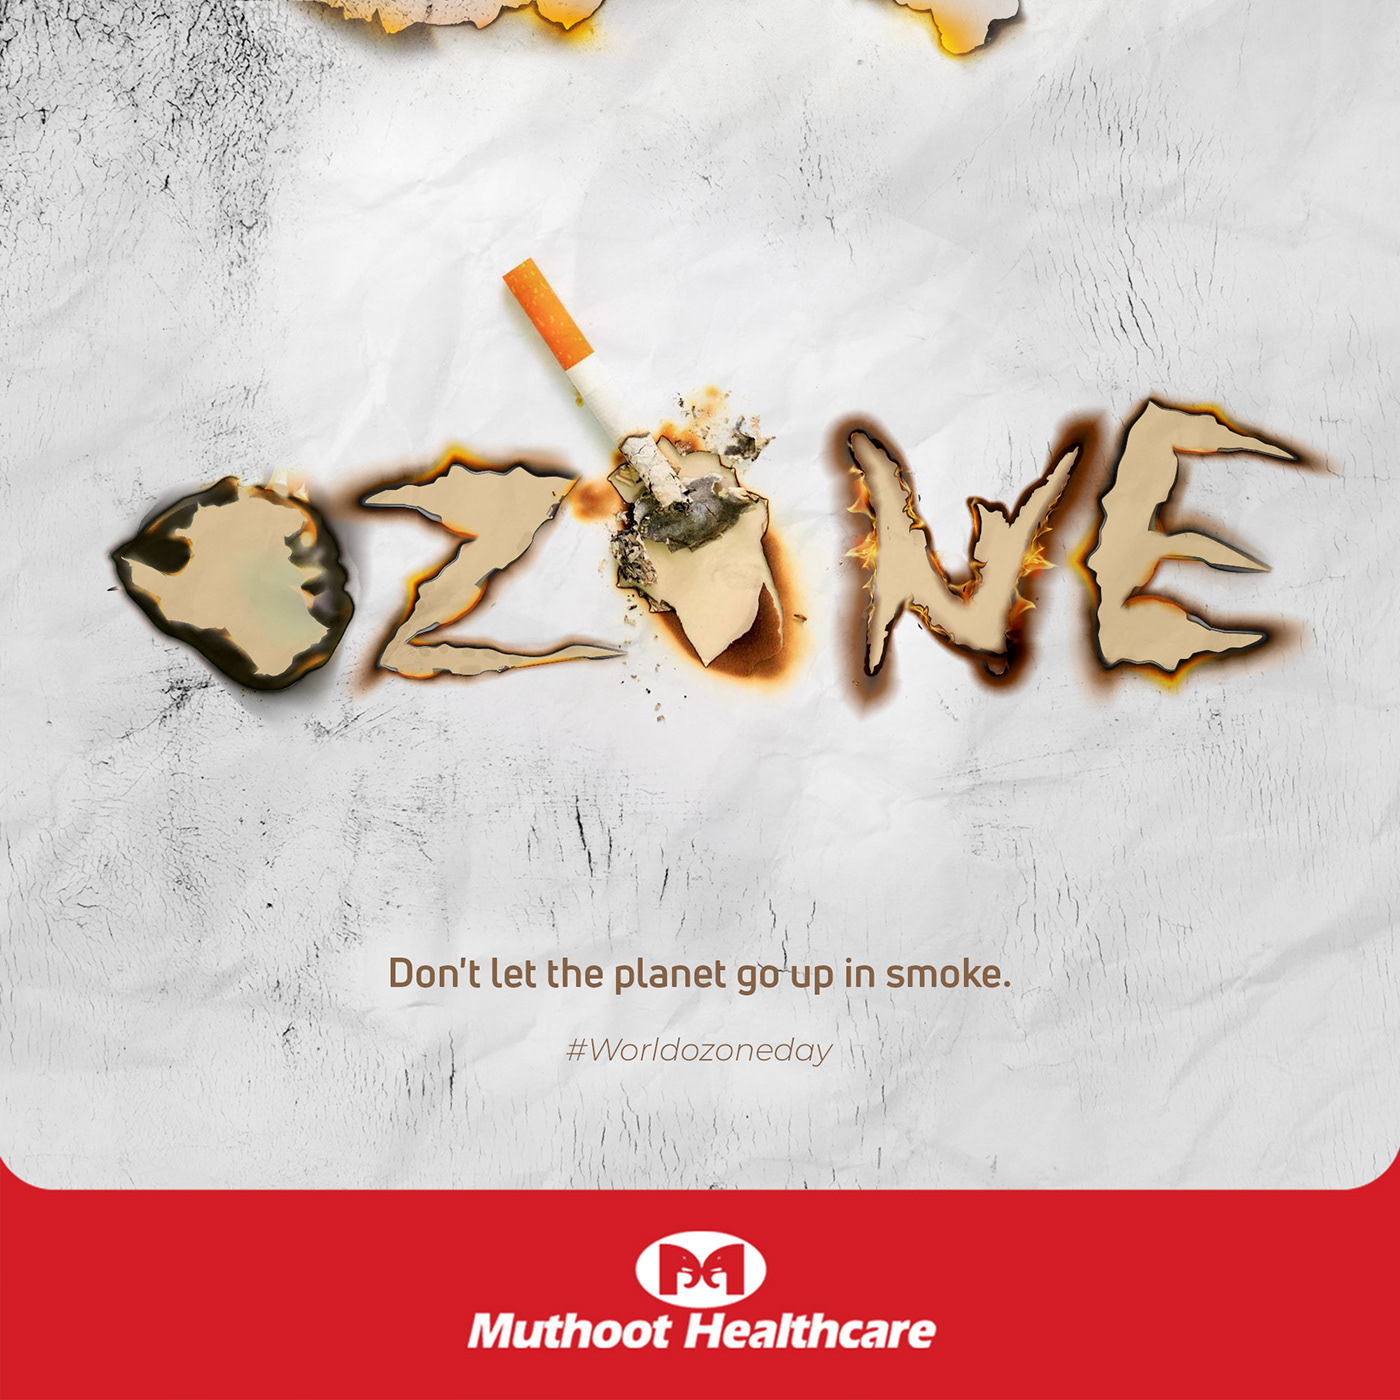 muthoot health care Social Media Posters creative ideas